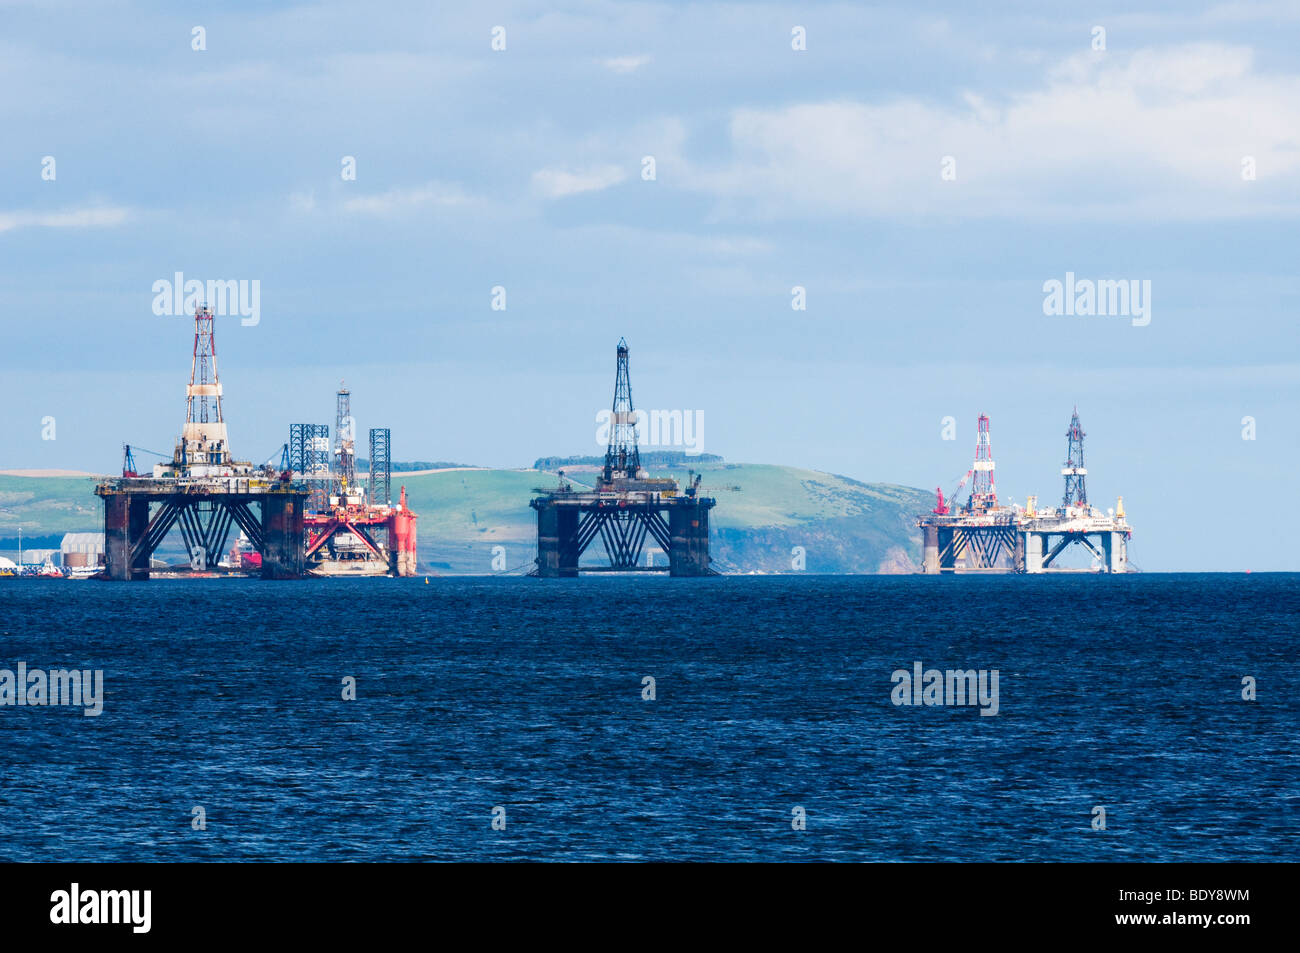 Oil Rig platforms in the Cromarty Firth near Invergordon Stock Photo